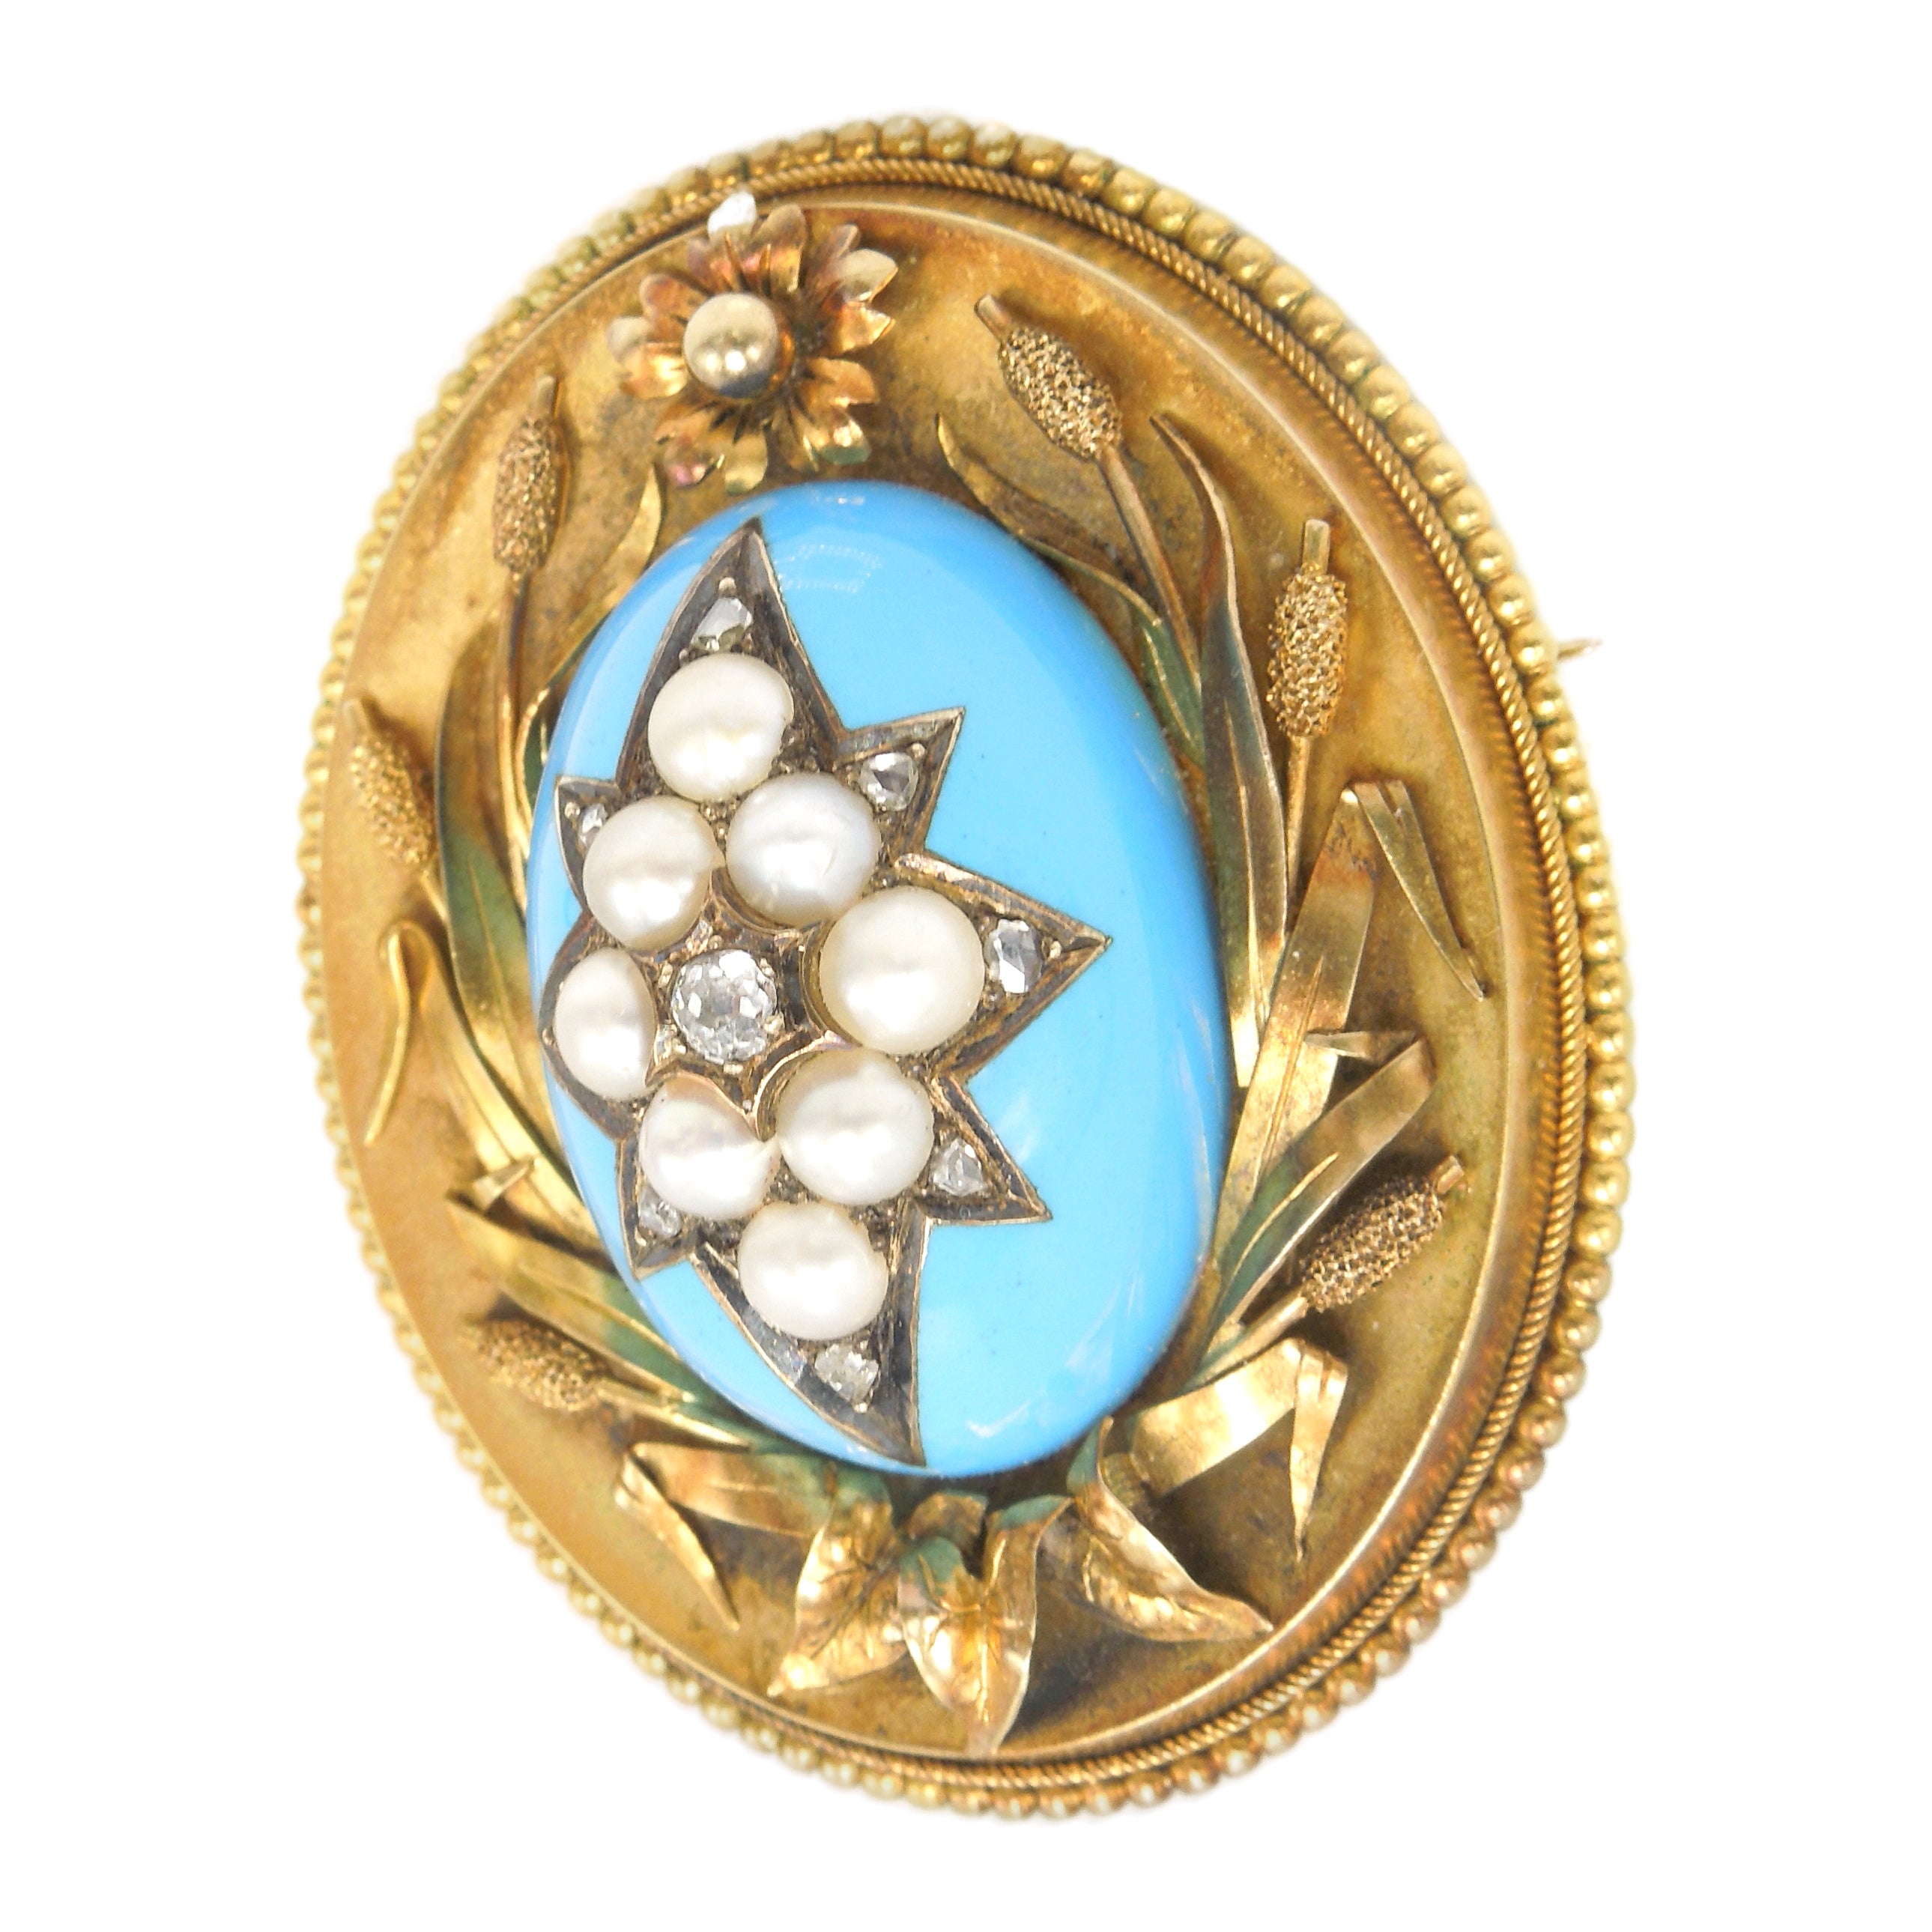 18K Yellow Gold Victorian Locket with Starburst of Pearls and Rose Cut Diamonds Inlaid in Turquoise Glass